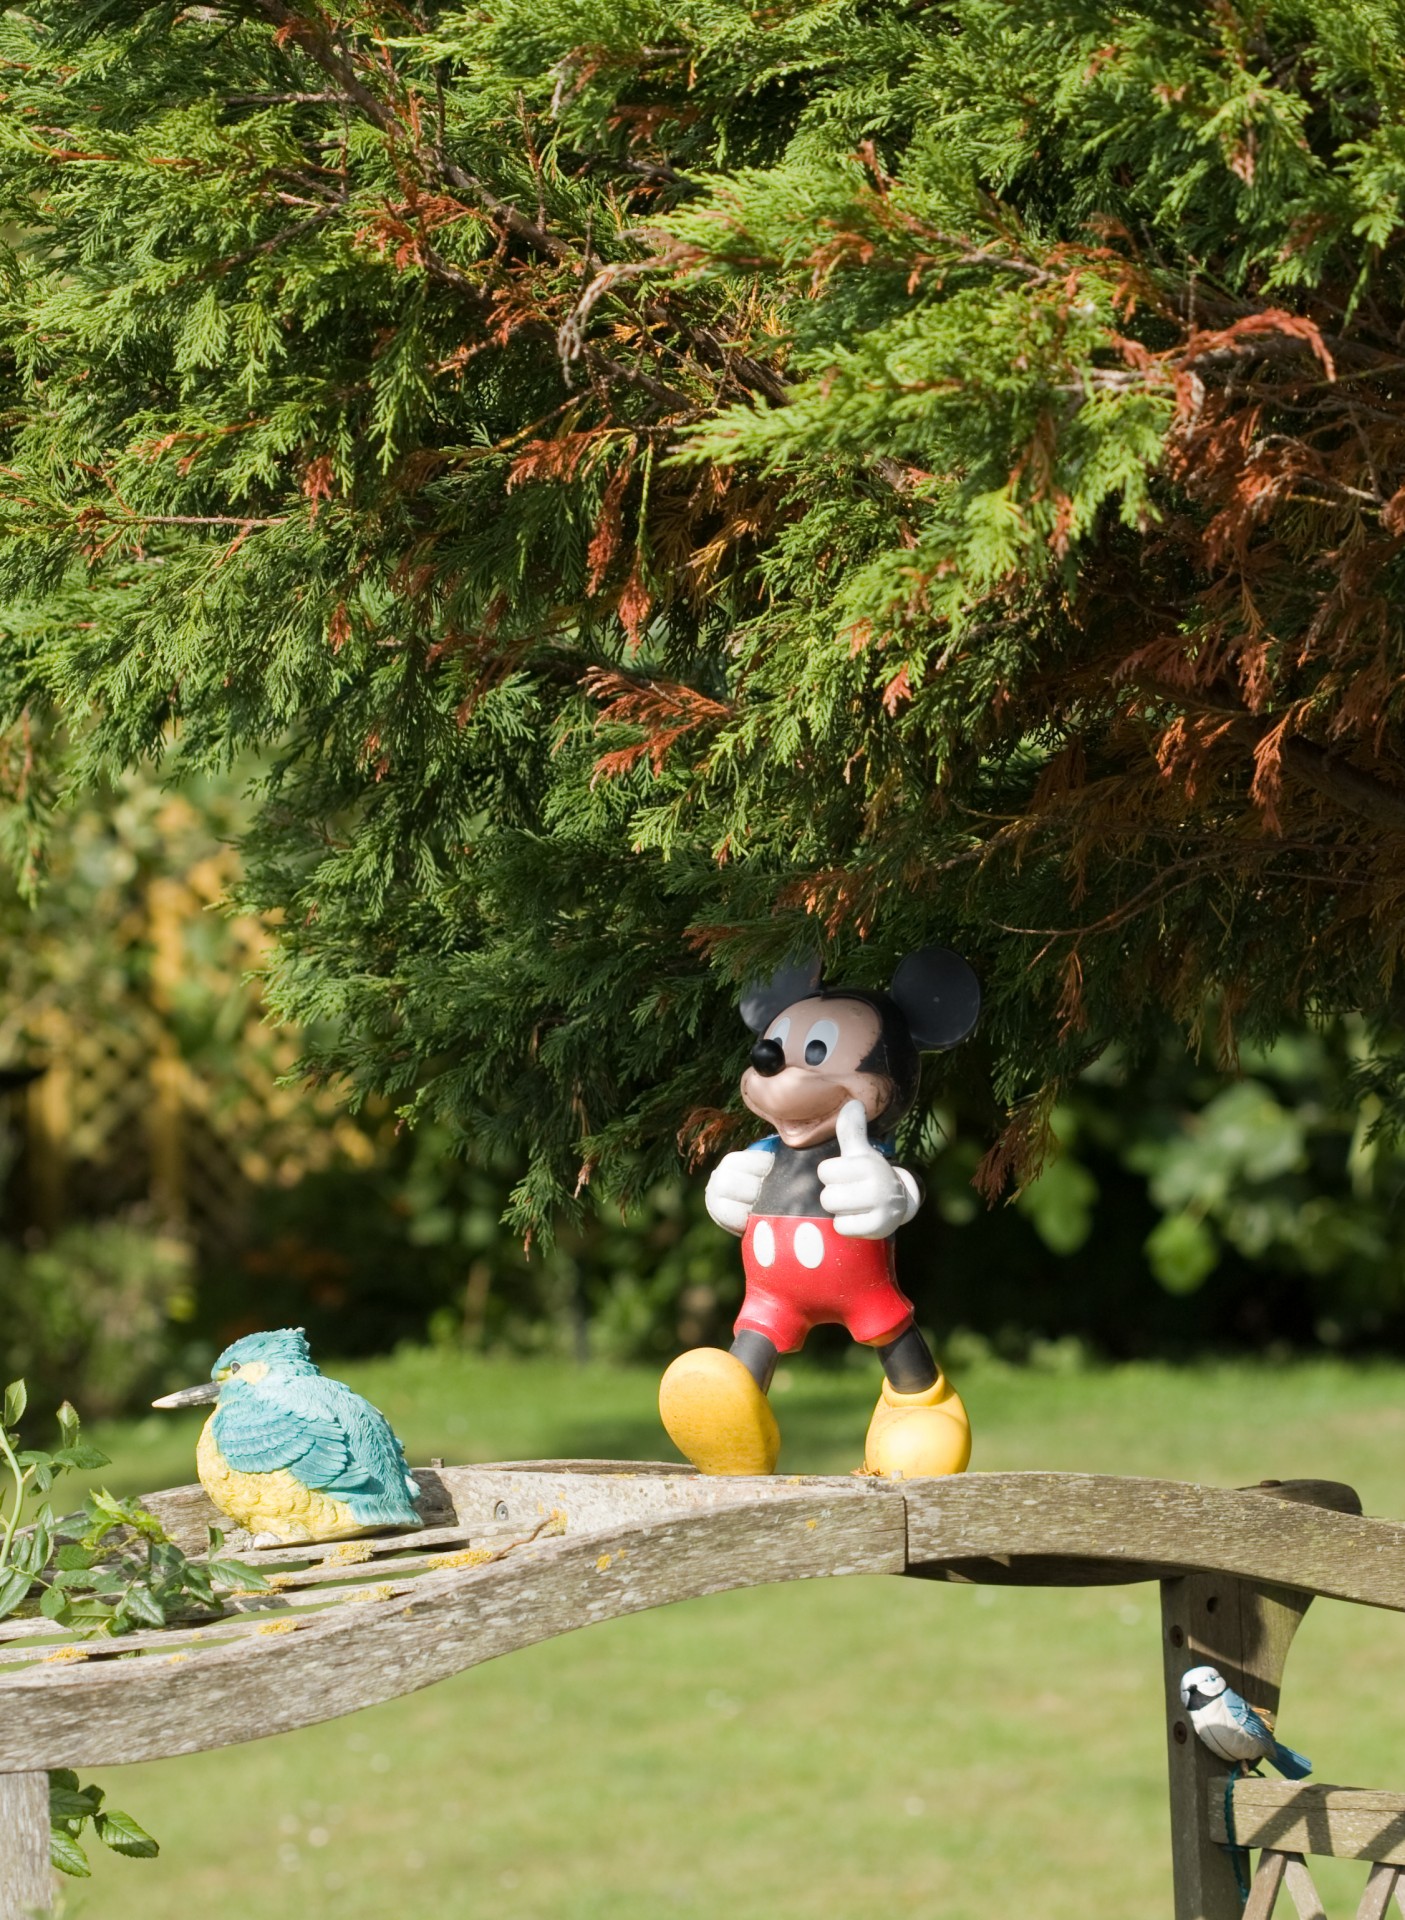 Mickey Mouse Mouse Garden Cute Statue Free Image From Needpix Com